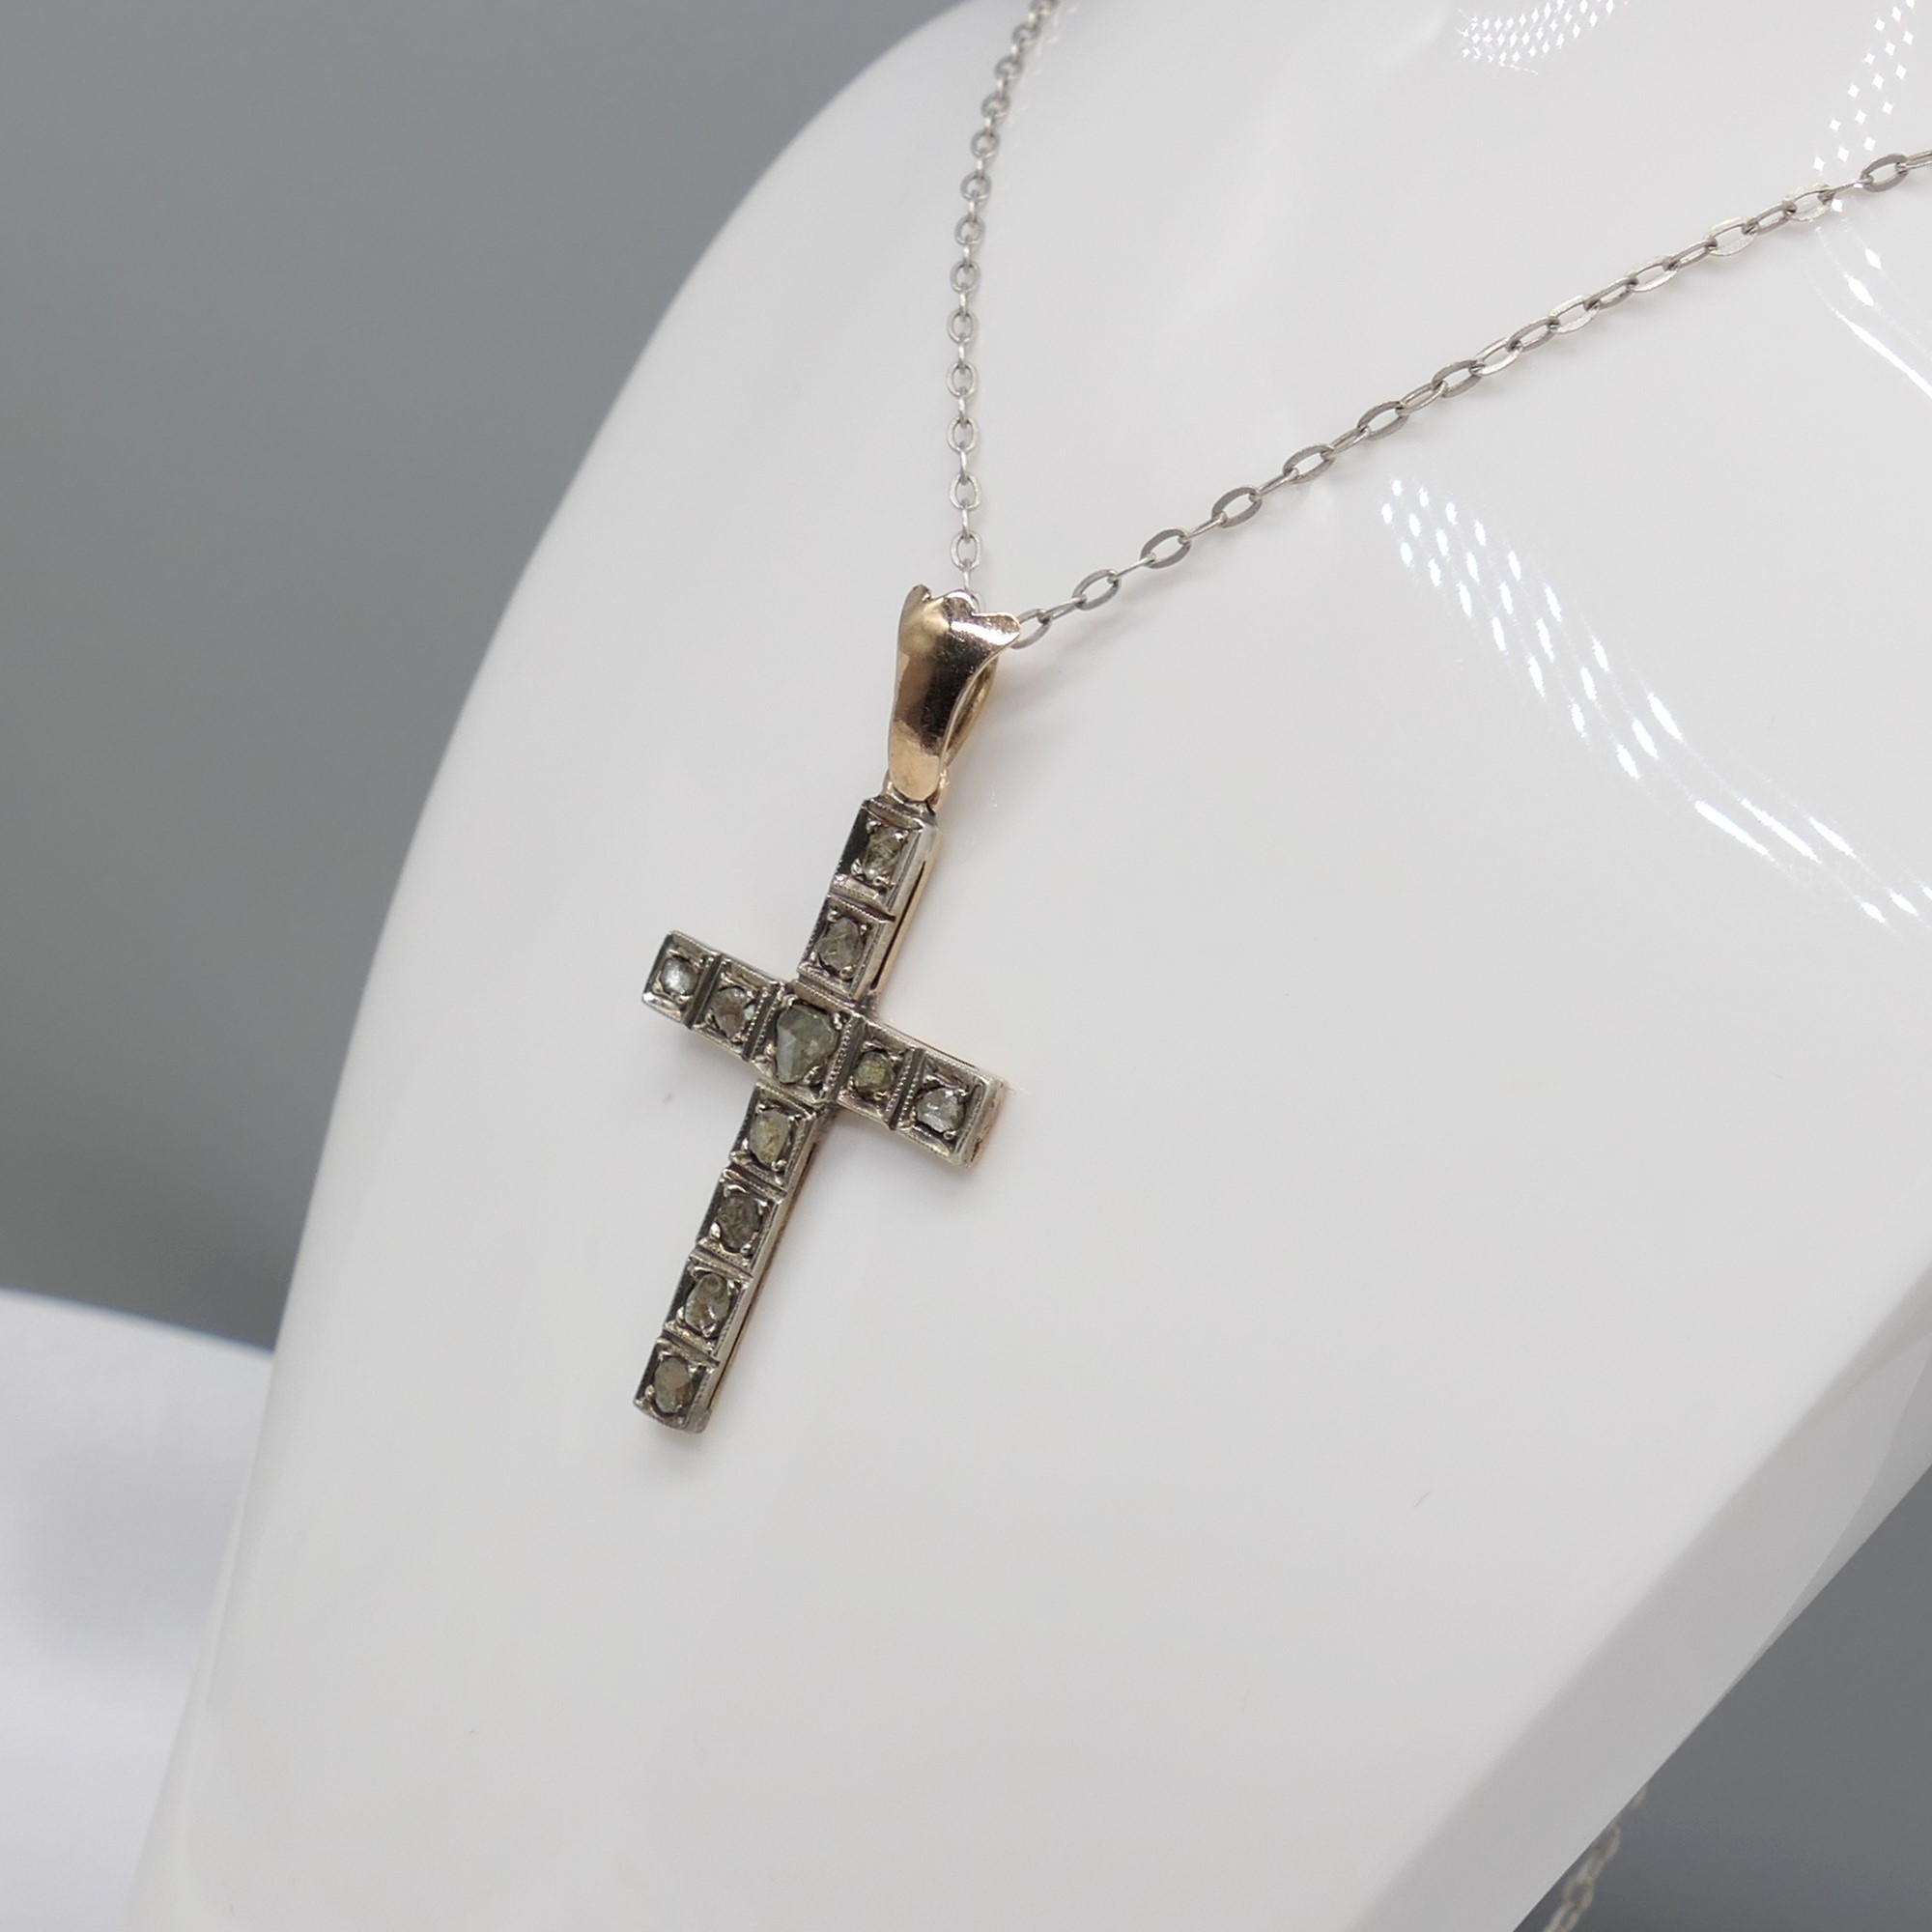 Antique, Hand Fashioned Rose-Cut Diamond Cross Pendant In Yellow Gold and Silver - Image 3 of 6